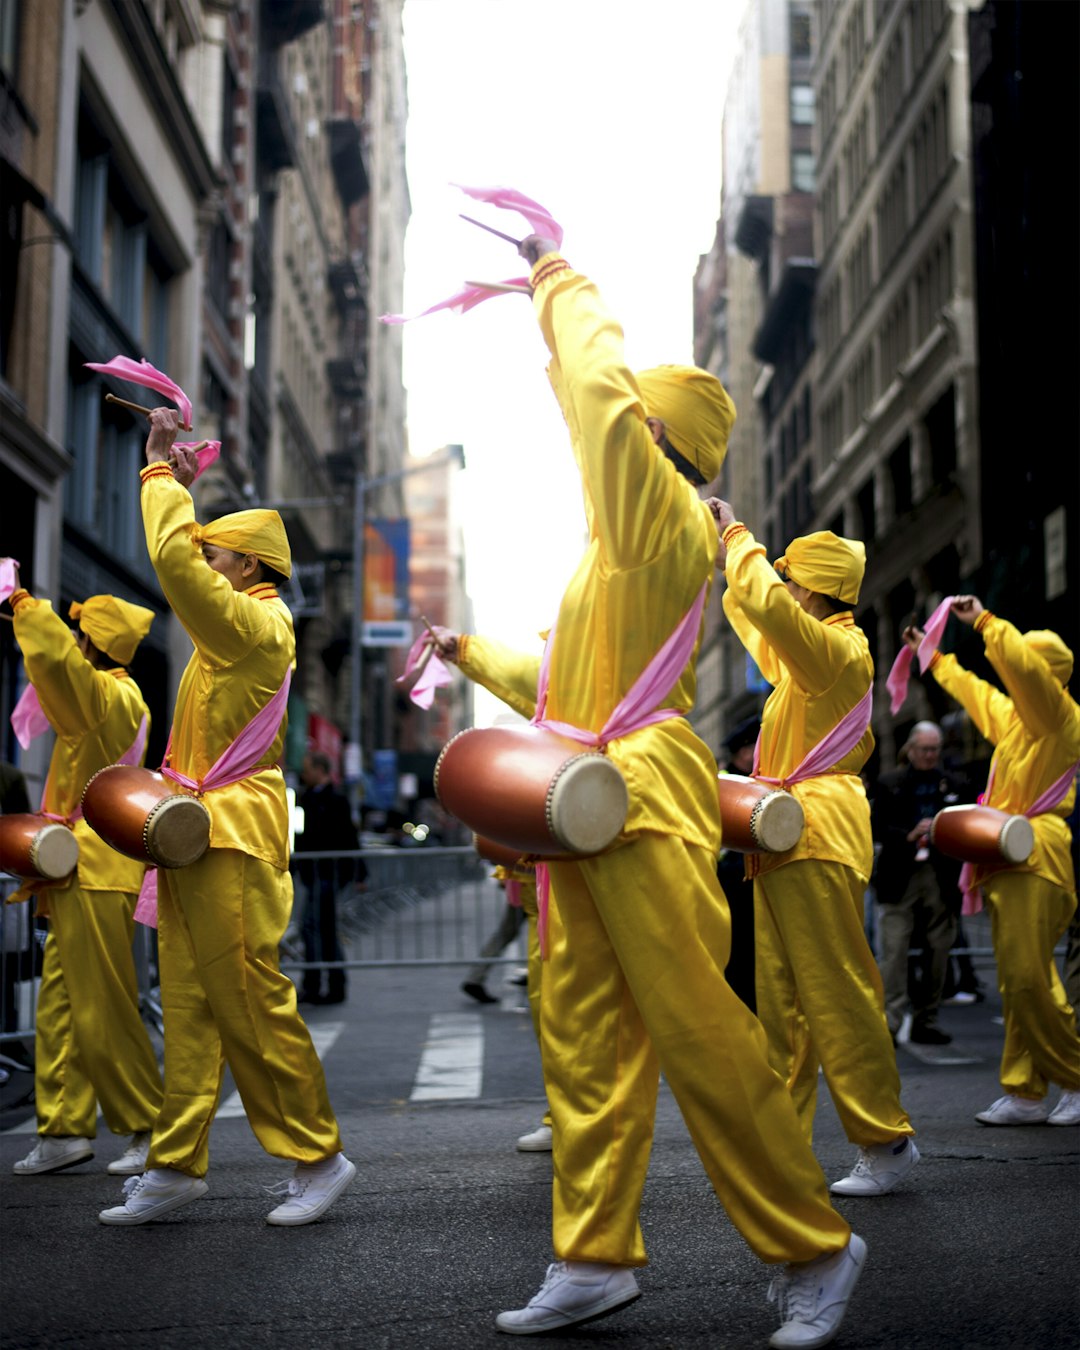 Falun Gafa practitioners in the NYC Veterans Day Parade shot by photographer, Julian Myles